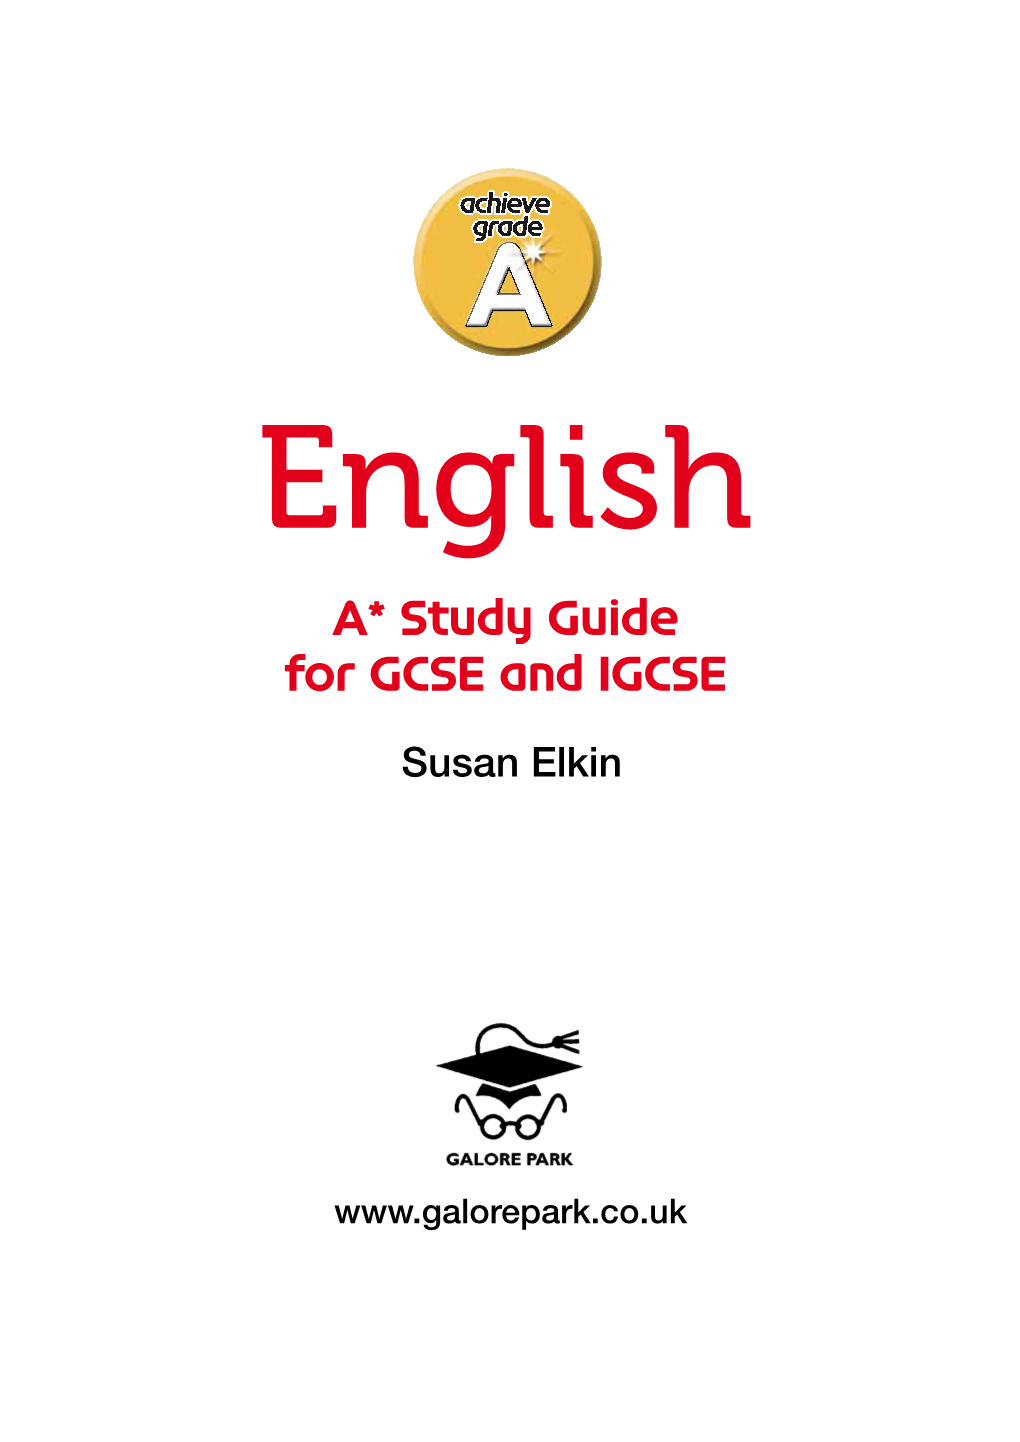 For GCSE and IGCSE A* Study Guide